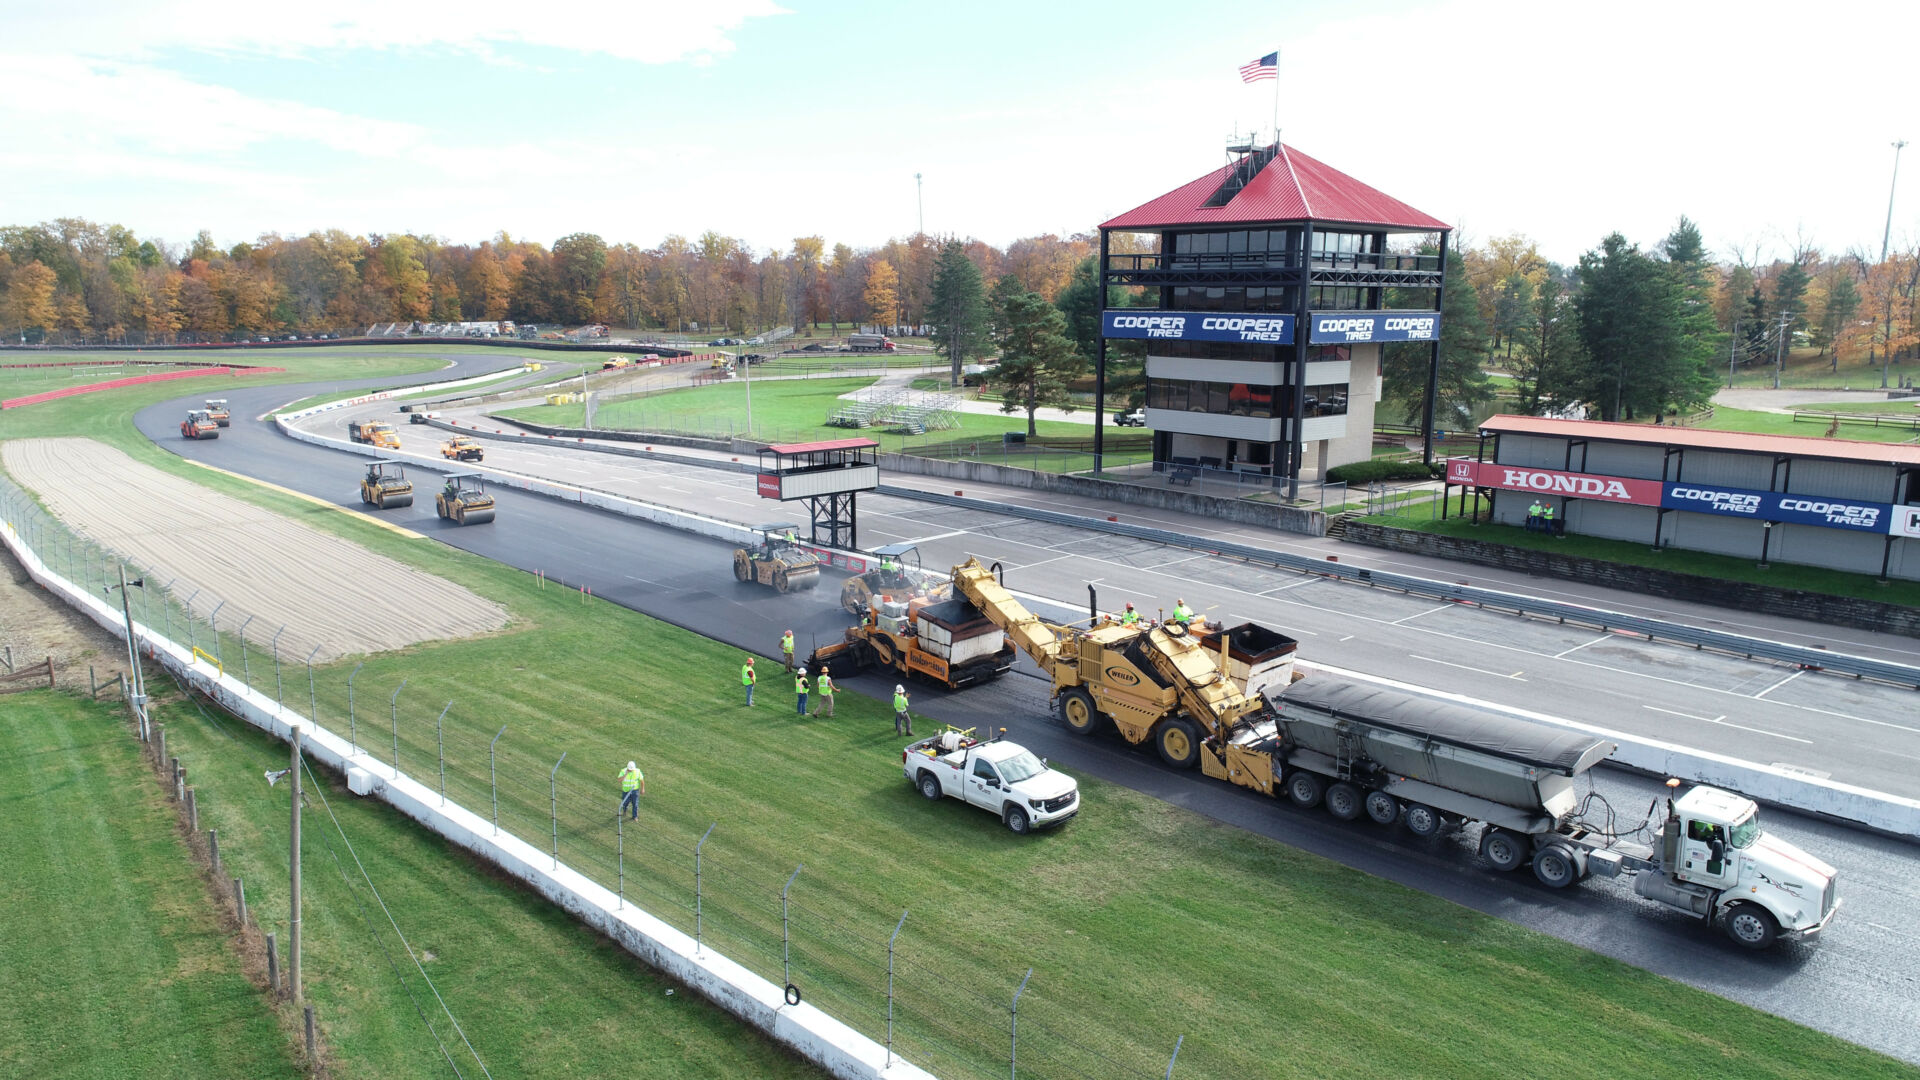 Mid-Ohio Sports Car Course was repaved by Kokosing Construction Company in October. Photo courtesy Kokosing/Mid-Ohio Sports Car Course.